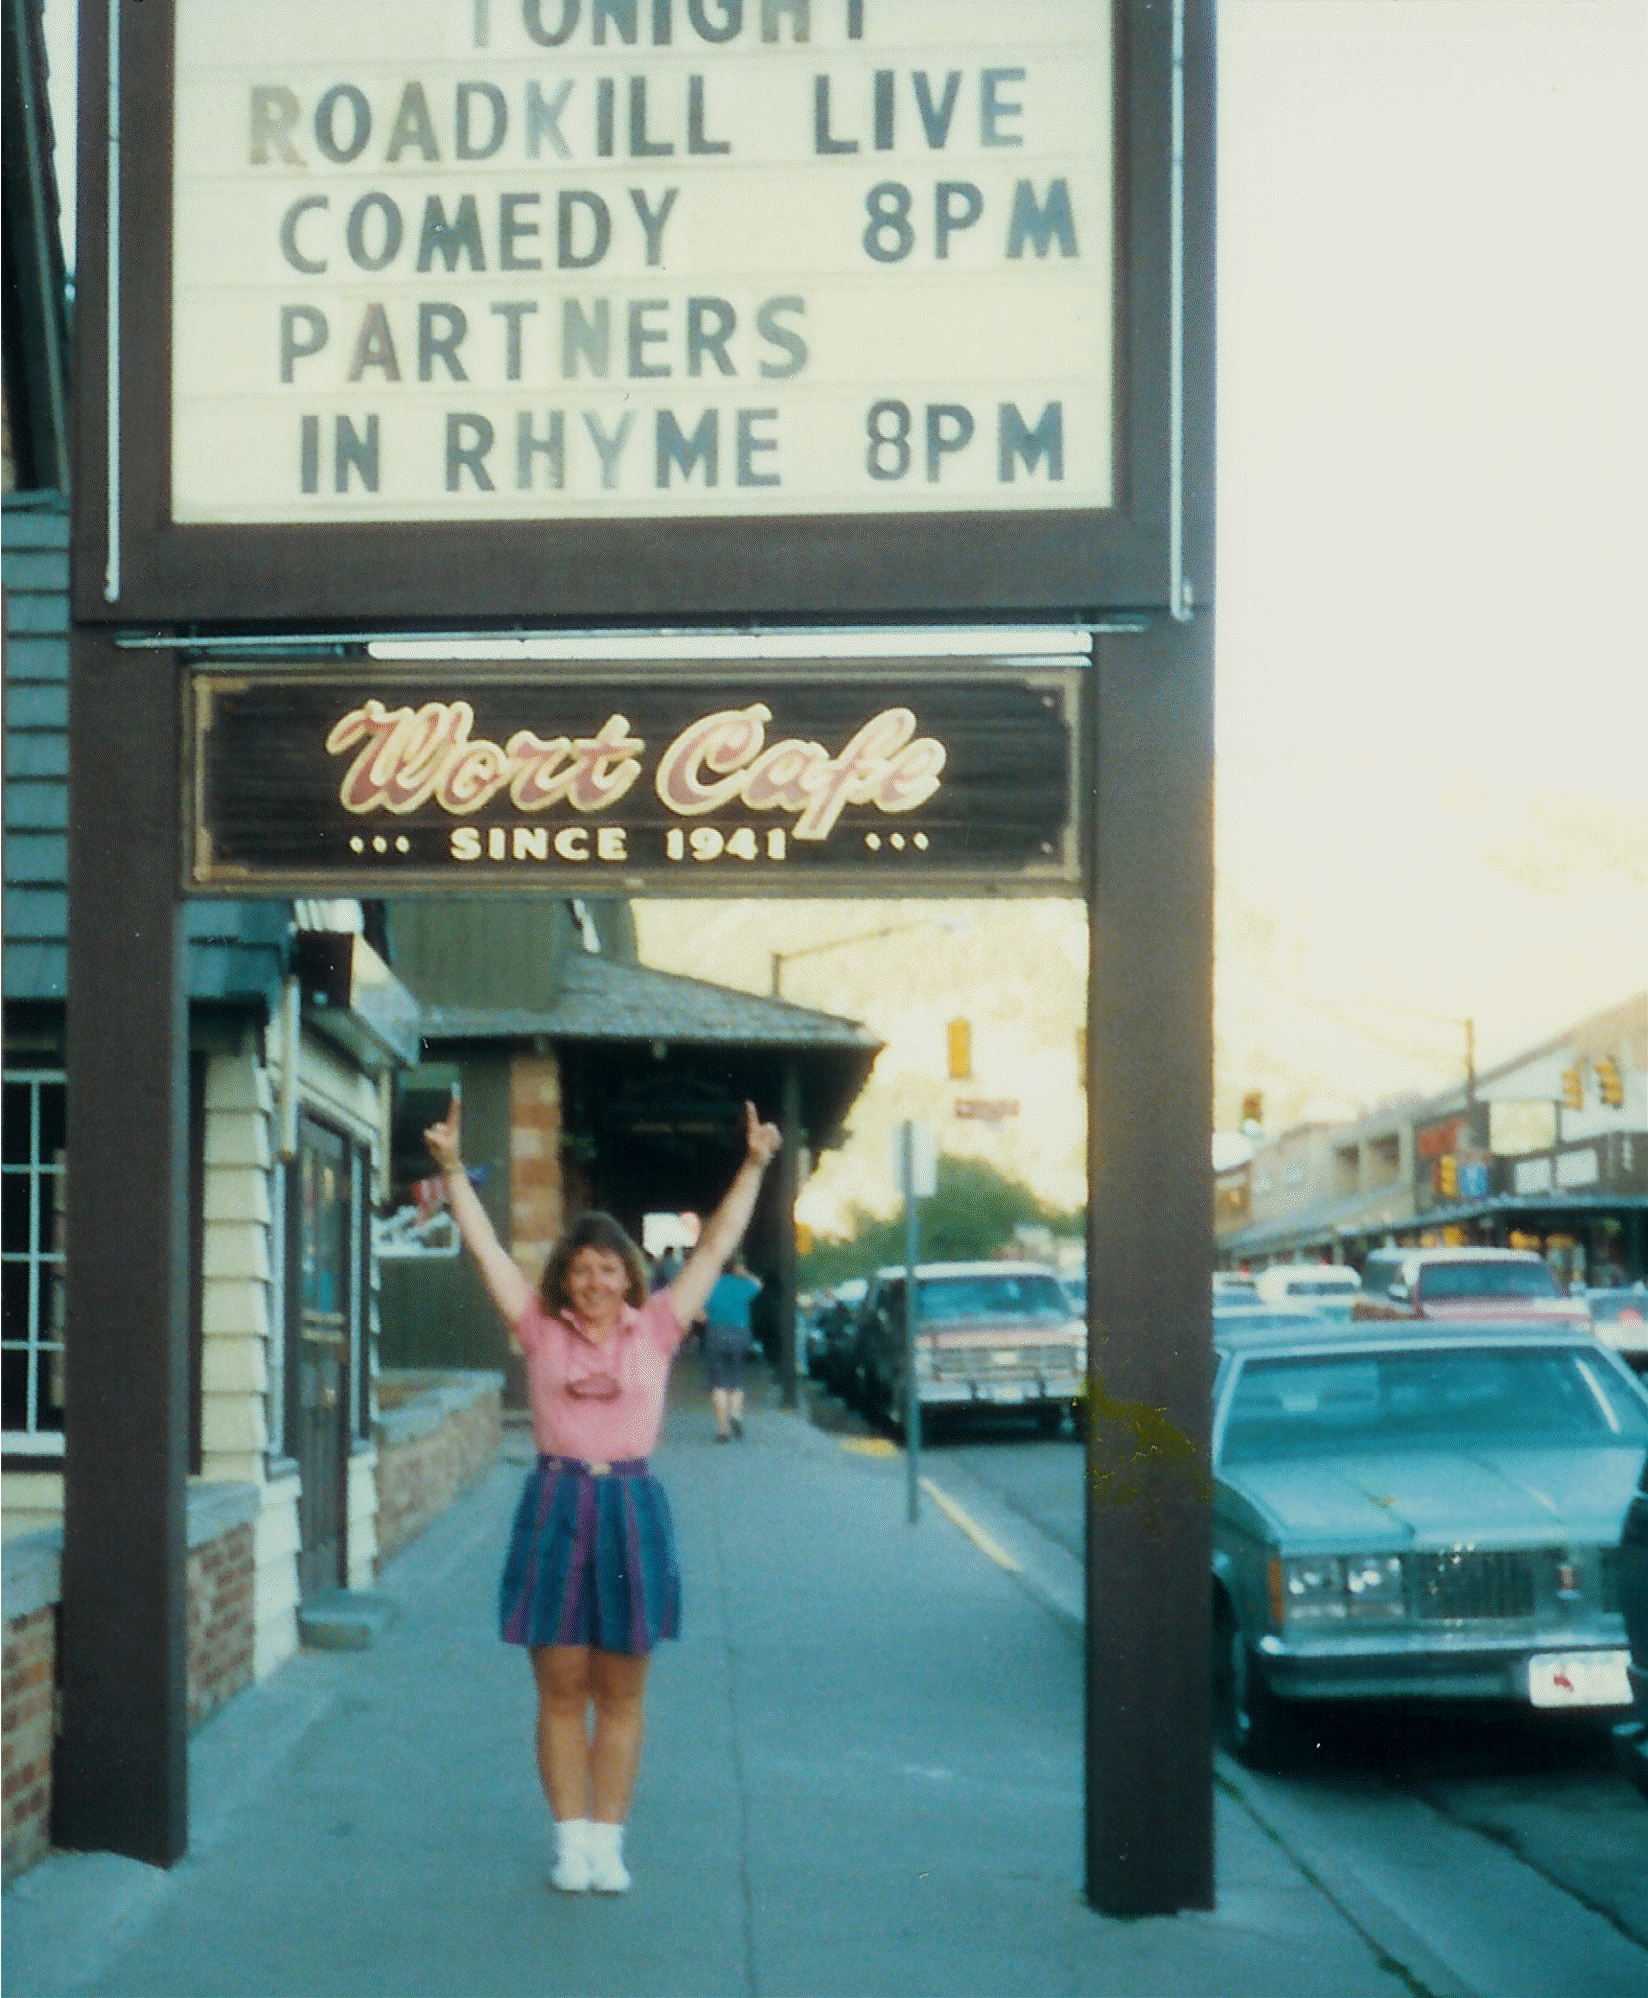 Photo of DJ Choupin standing under the marquee for the Wort Hotel advertising Roadkill Live Comedy 8 pm